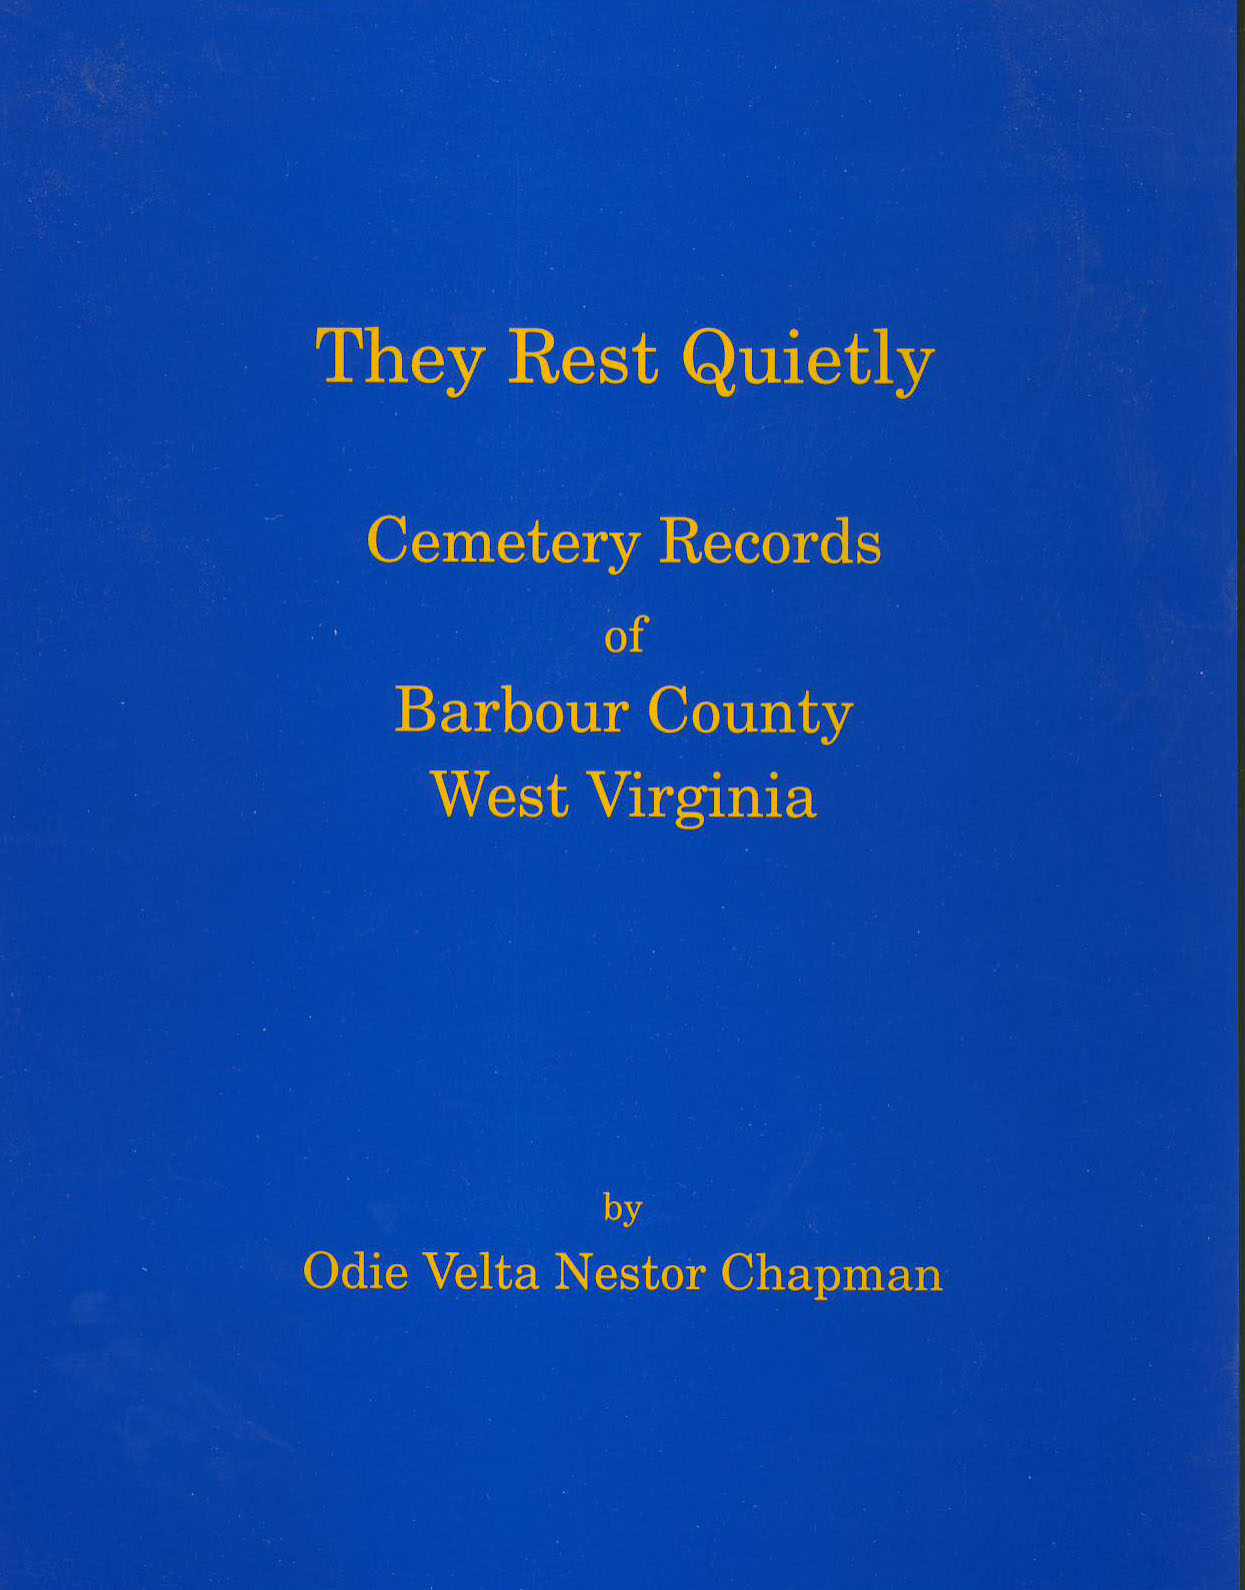 They Rest Quietly -- Cemetery Records of Barbour County, West Virginia